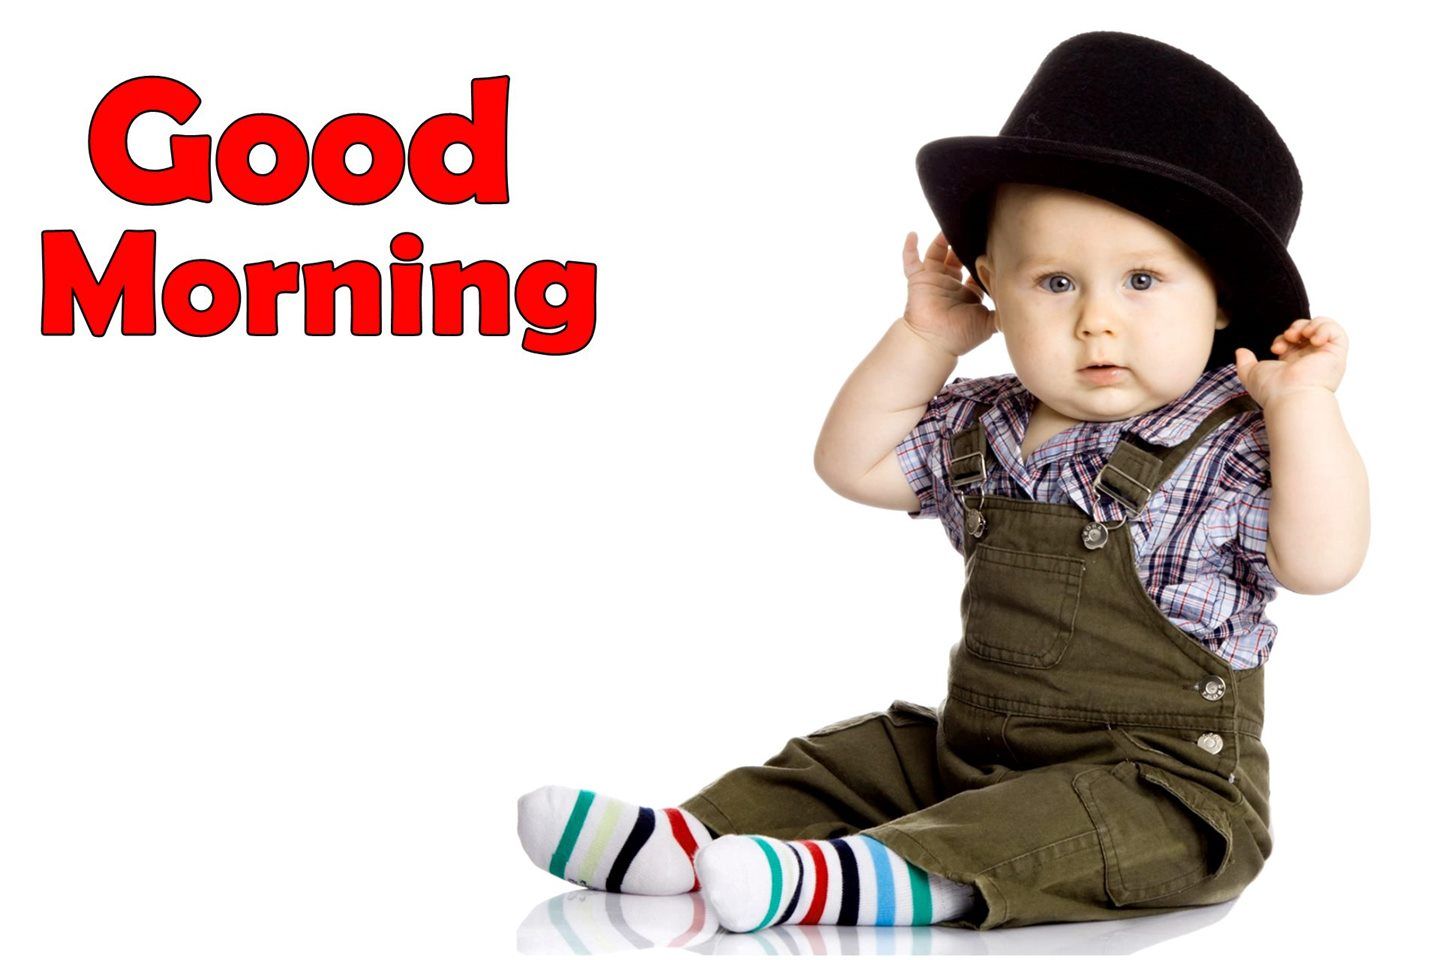 Good Morning Cute Baby Wearing Hat Hd Wallpapers.